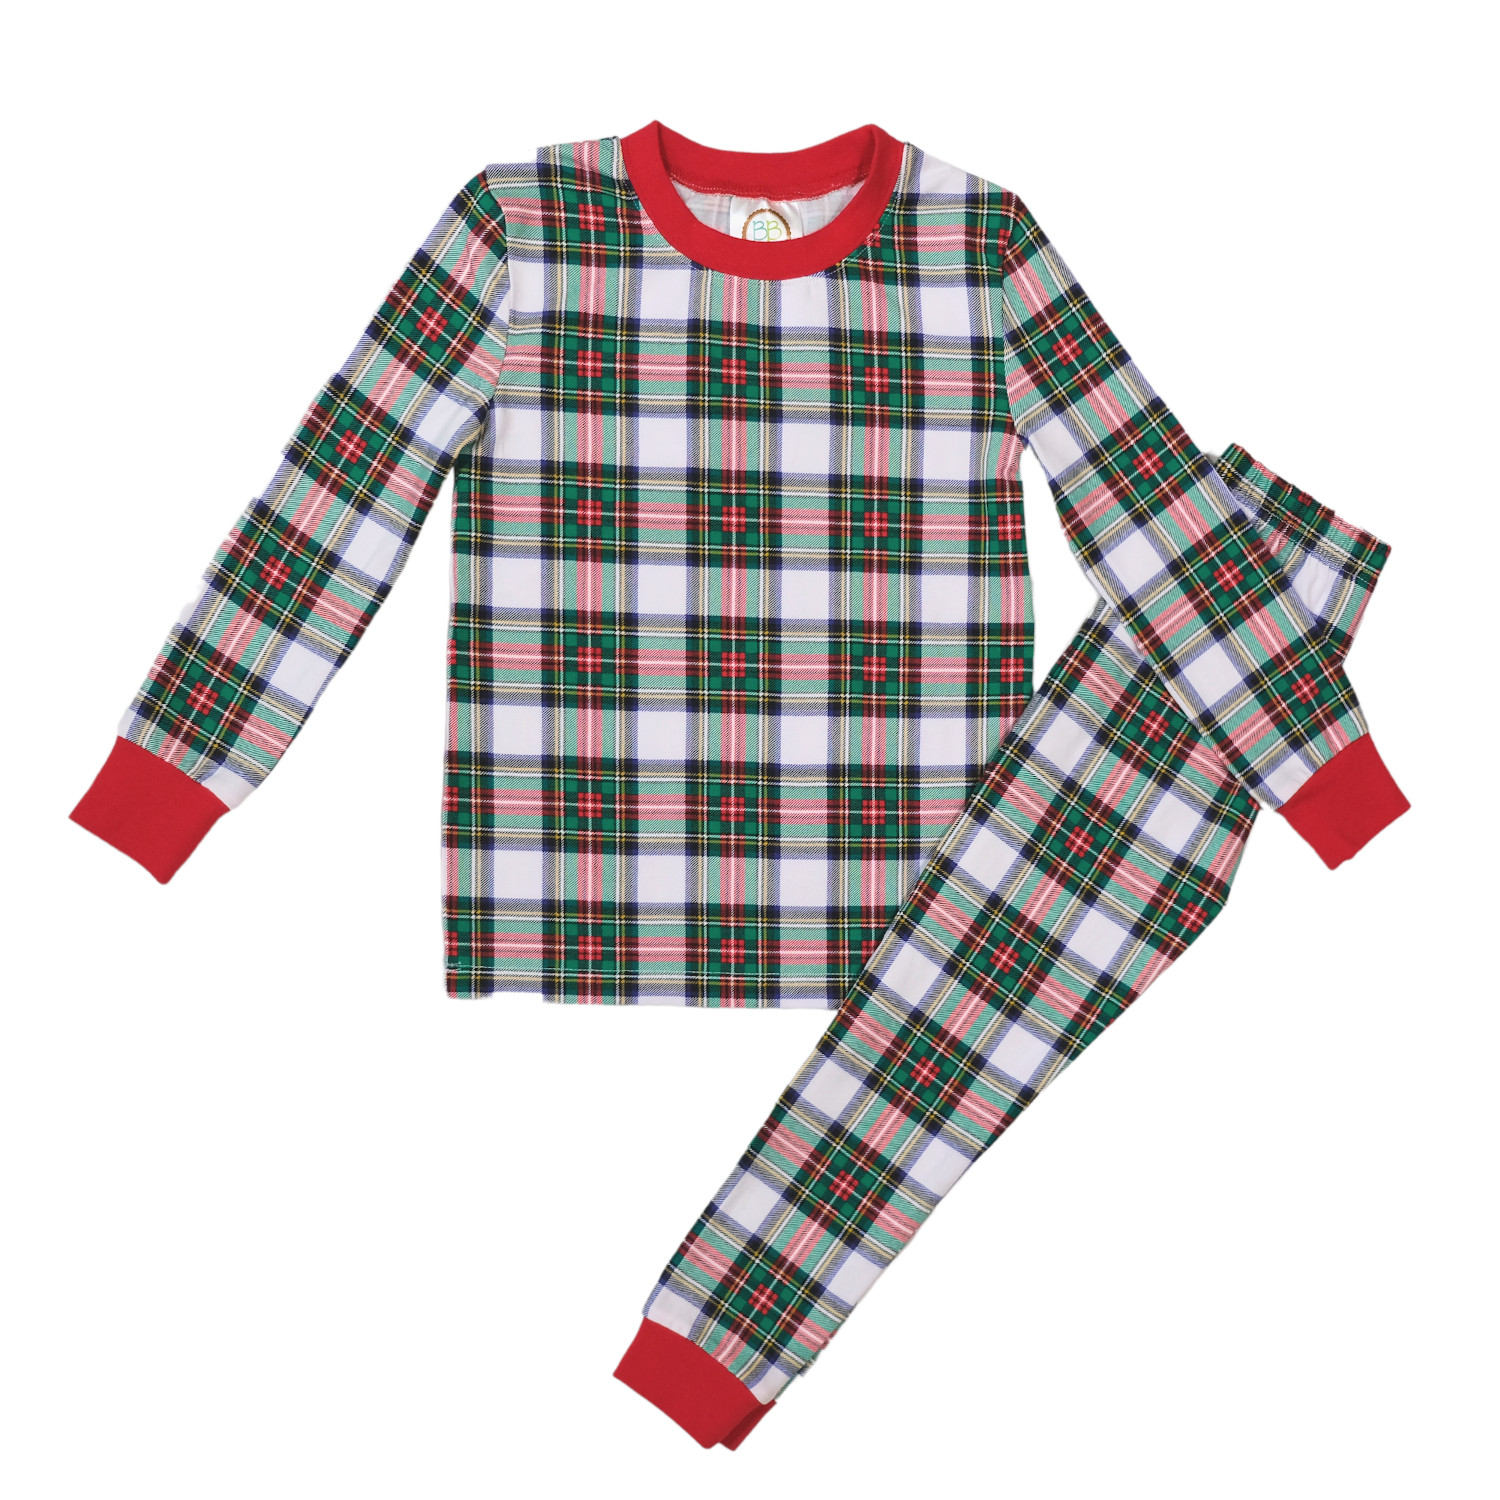 Blank Christmas Pajamas for Embroidery and Applique